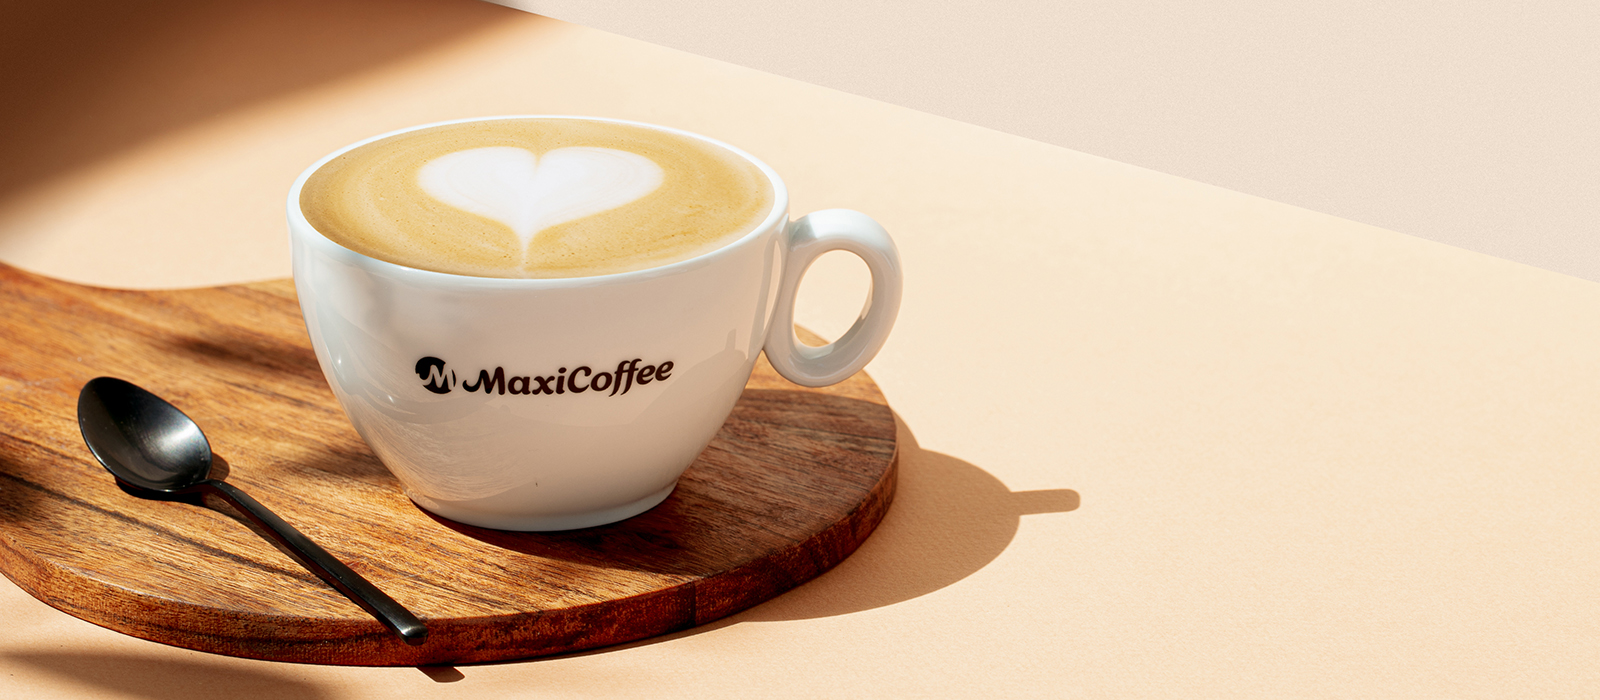 MaxiCoffee at the London Coffee Festival